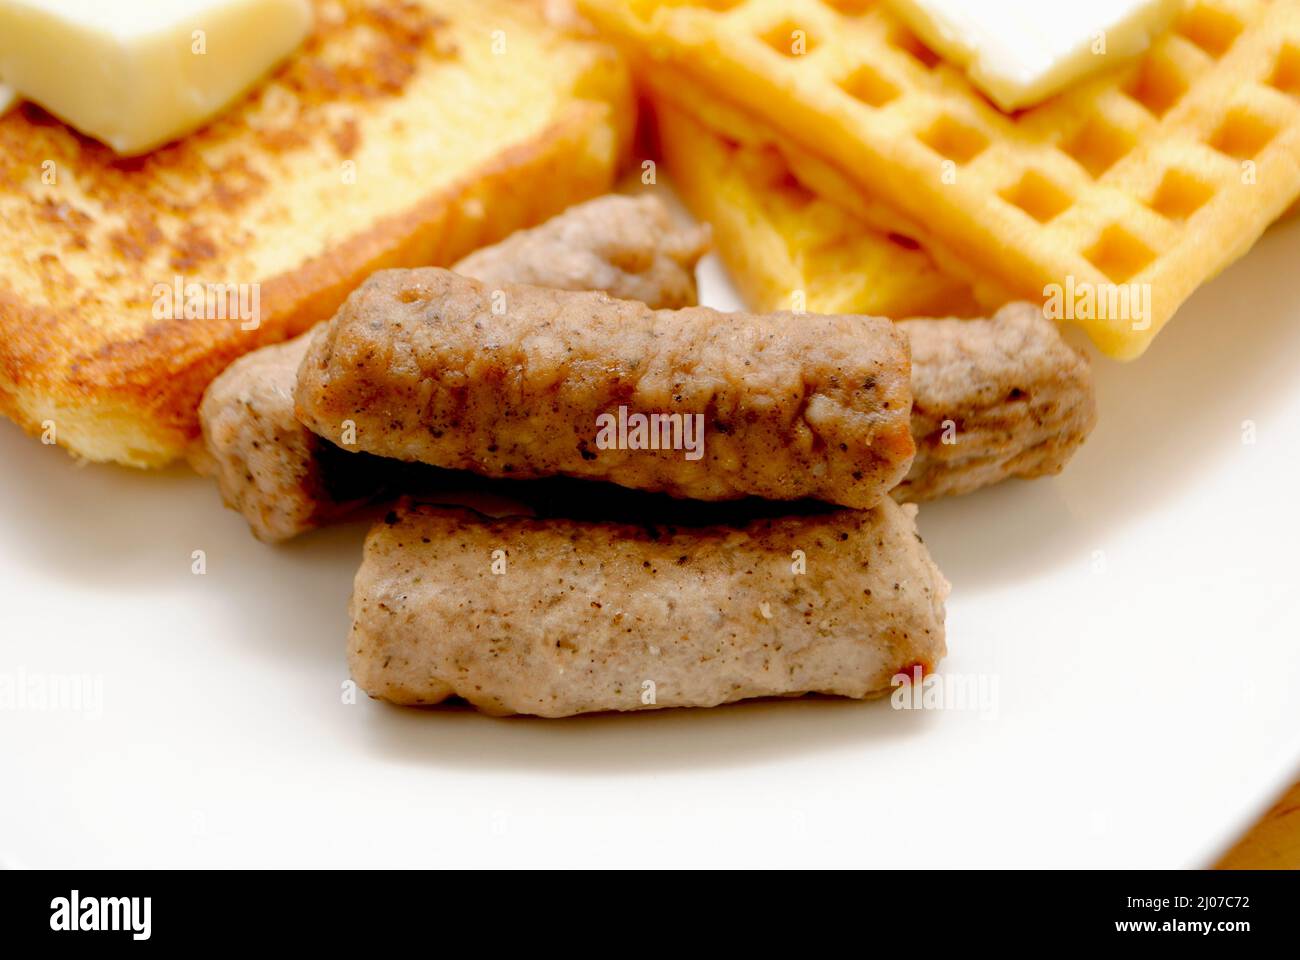 Close-Up of Cooked Breakfast Sausage Links Served on a Plate with Other Breakfast Foods Stock Photo